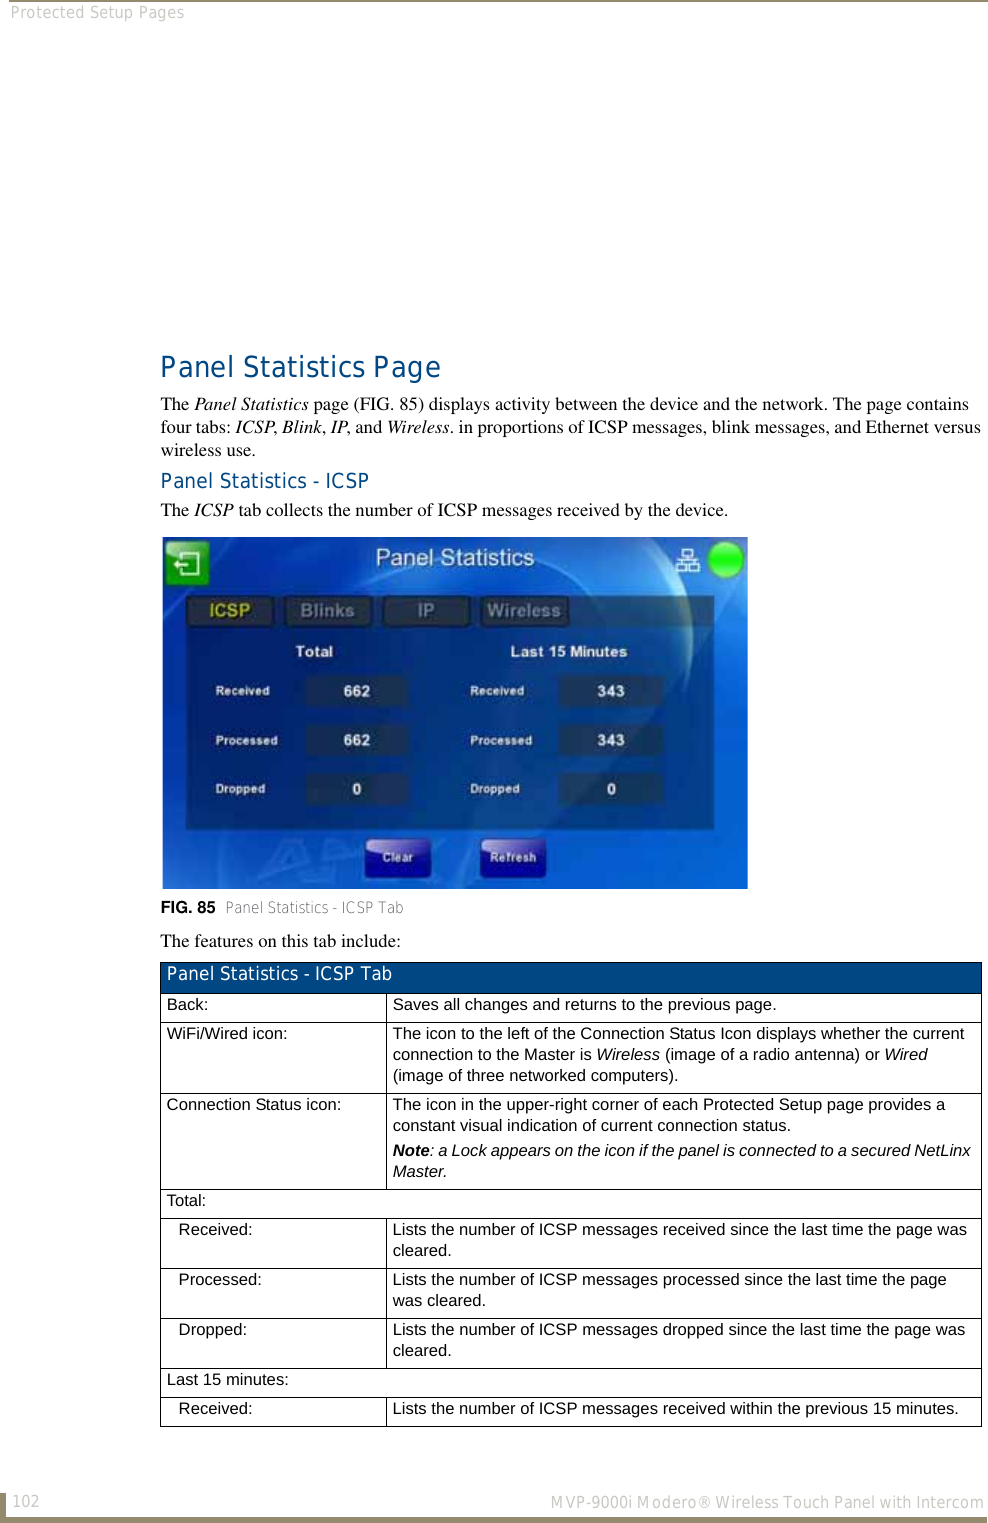 Protected Setup Pages102  MVP-9000i Modero® Wireless Touch Panel with IntercomPanel Statistics PageThe Panel Statistics page (FIG. 85) displays activity between the device and the network. The page contains four tabs: ICSP, Blink, IP, and Wireless. in proportions of ICSP messages, blink messages, and Ethernet versus wireless use.Panel Statistics - ICSPThe ICSP tab collects the number of ICSP messages received by the device.The features on this tab include:FIG. 85  Panel Statistics - ICSP TabPanel Statistics - ICSP TabBack: Saves all changes and returns to the previous page.WiFi/Wired icon: The icon to the left of the Connection Status Icon displays whether the current connection to the Master is Wireless (image of a radio antenna) or Wired (image of three networked computers).Connection Status icon: The icon in the upper-right corner of each Protected Setup page provides a constant visual indication of current connection status.Note: a Lock appears on the icon if the panel is connected to a secured NetLinx Master.Total:Received: Lists the number of ICSP messages received since the last time the page was cleared.Processed: Lists the number of ICSP messages processed since the last time the page was cleared.Dropped: Lists the number of ICSP messages dropped since the last time the page was cleared.Last 15 minutes:Received: Lists the number of ICSP messages received within the previous 15 minutes.